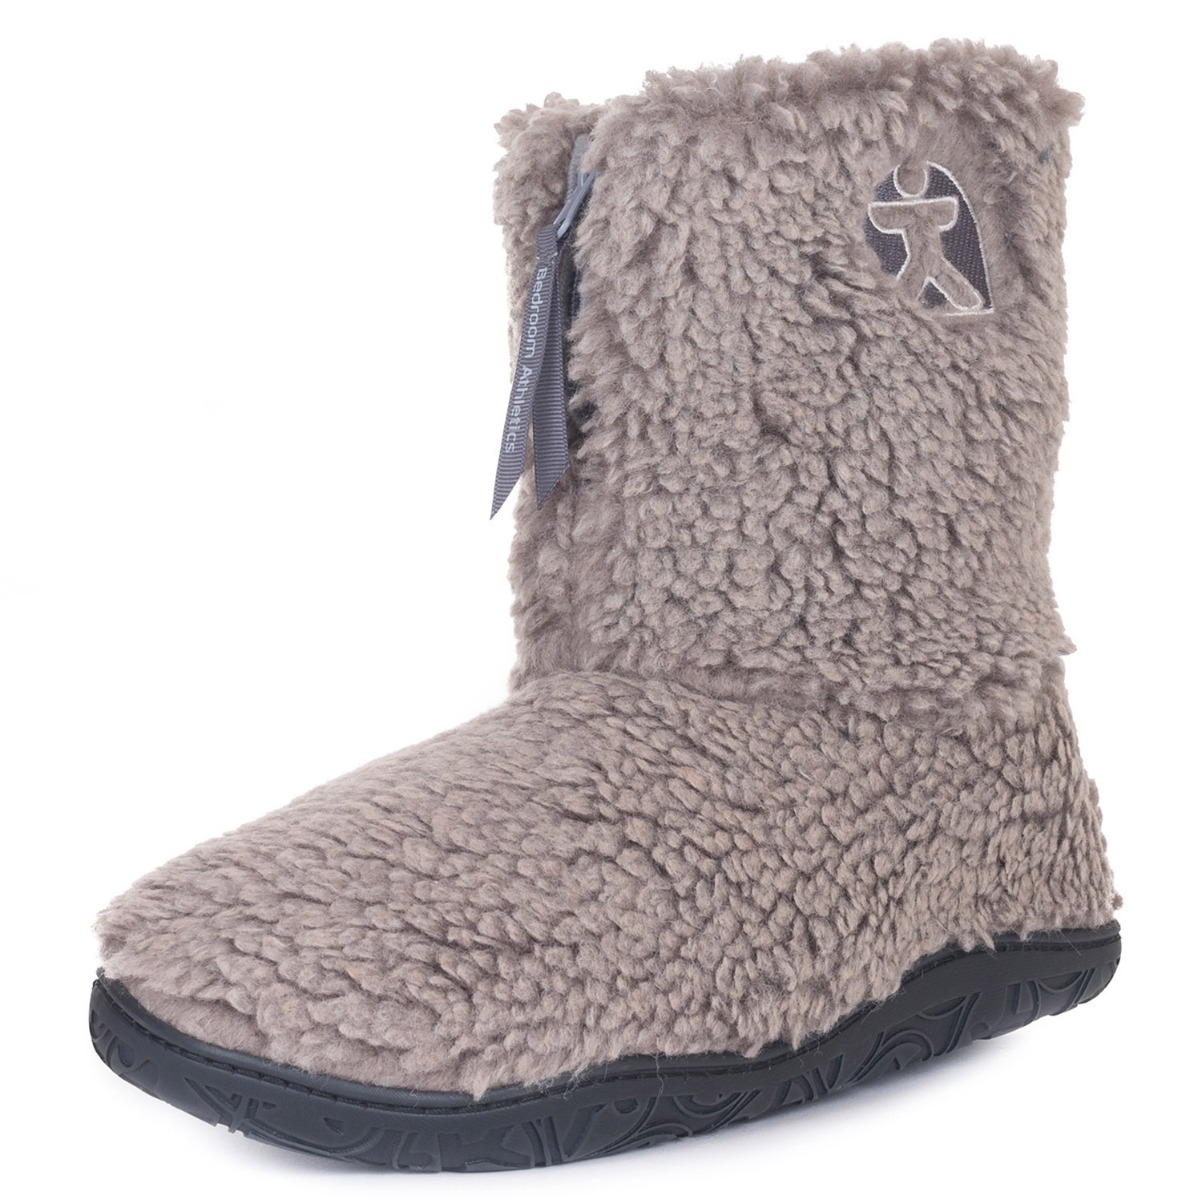 Gosling Snow Tipped Sherpa Slipper Boots – 989 – Washed Cool Grey – Men’s – Bedroom Athletics